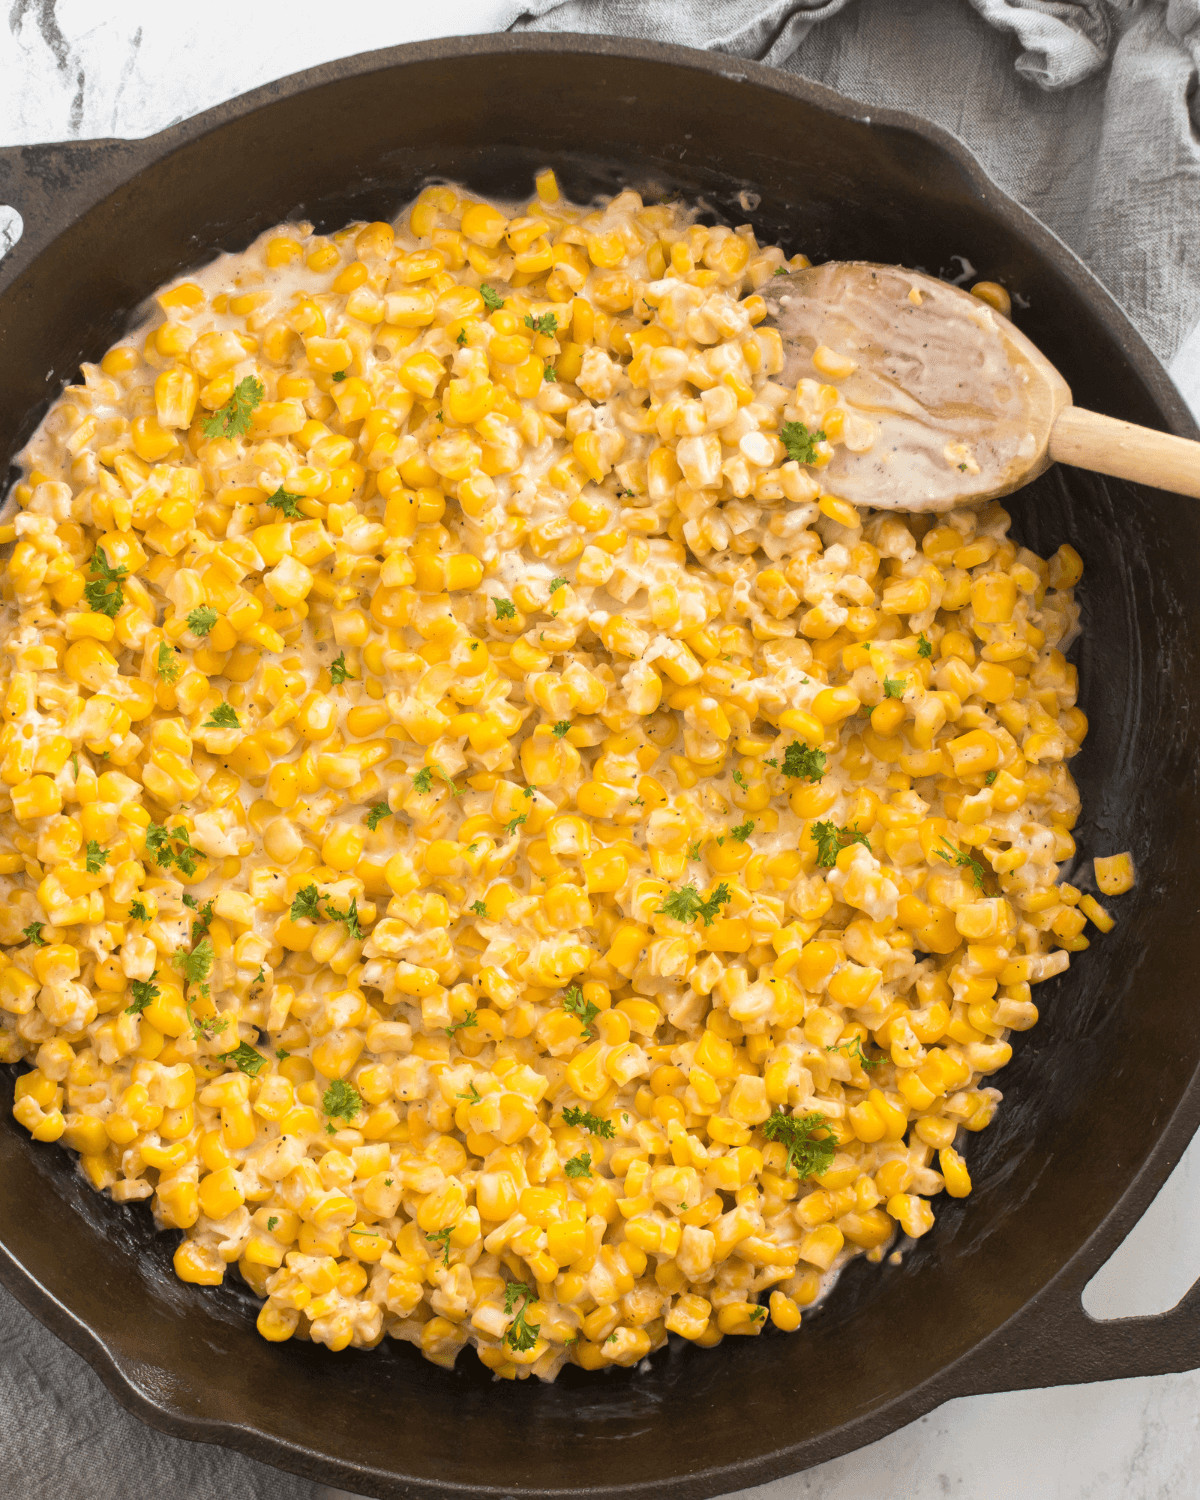 The finished honey butter skillet corn with fresh herbs on top.